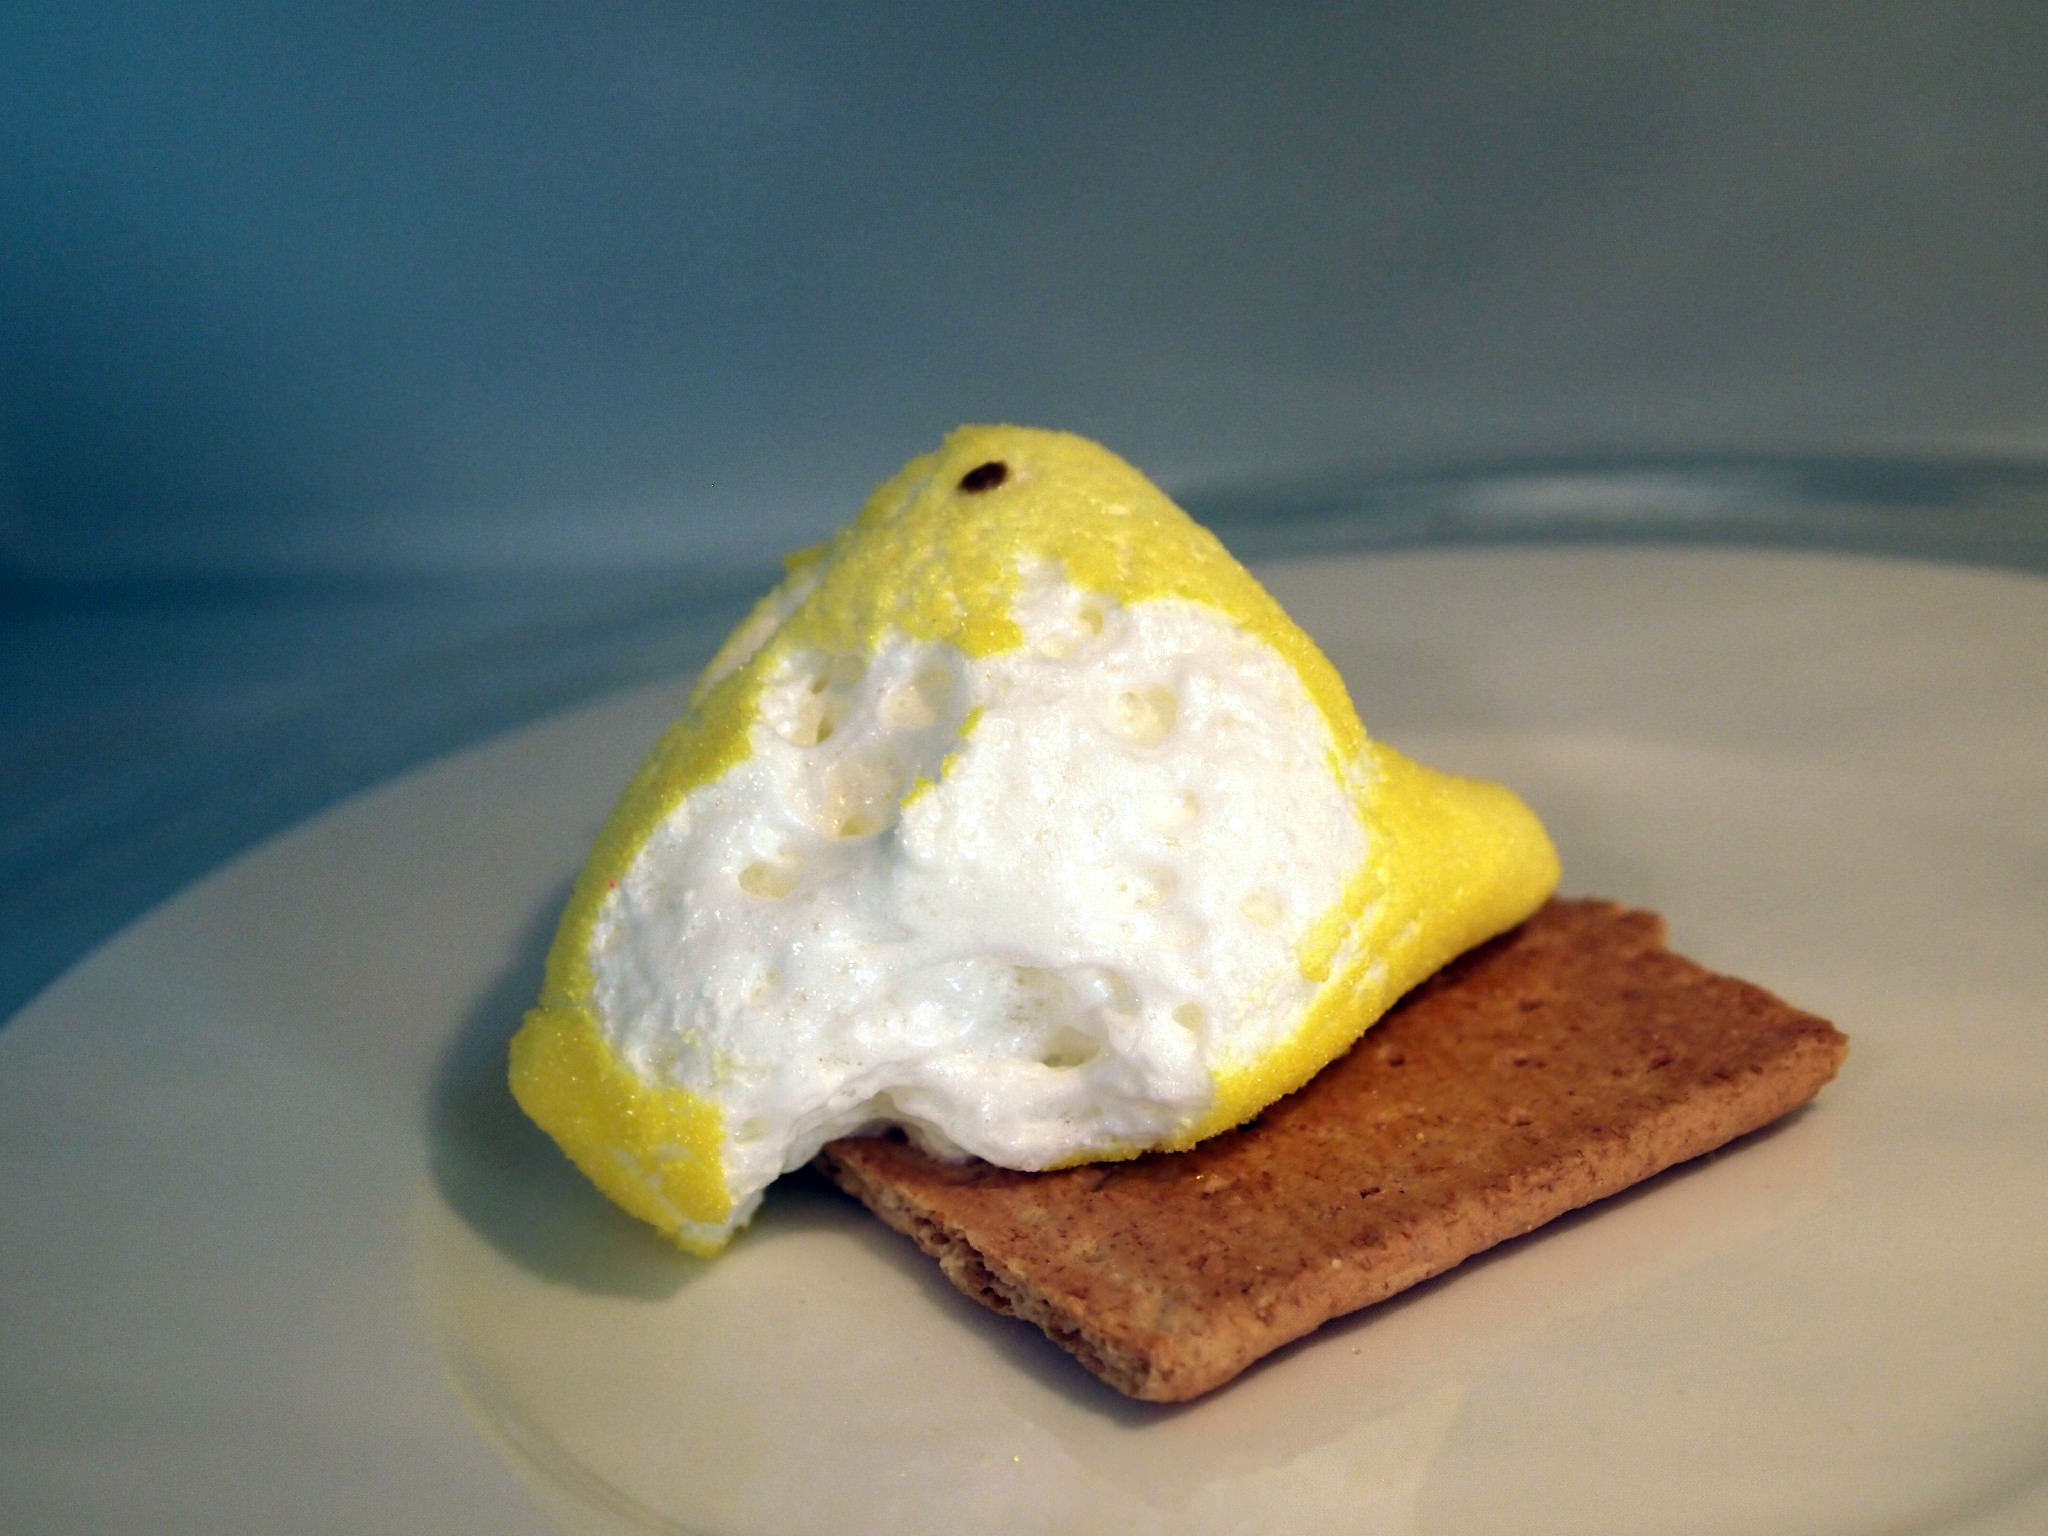 marshmallow Peeps - after being microwaved